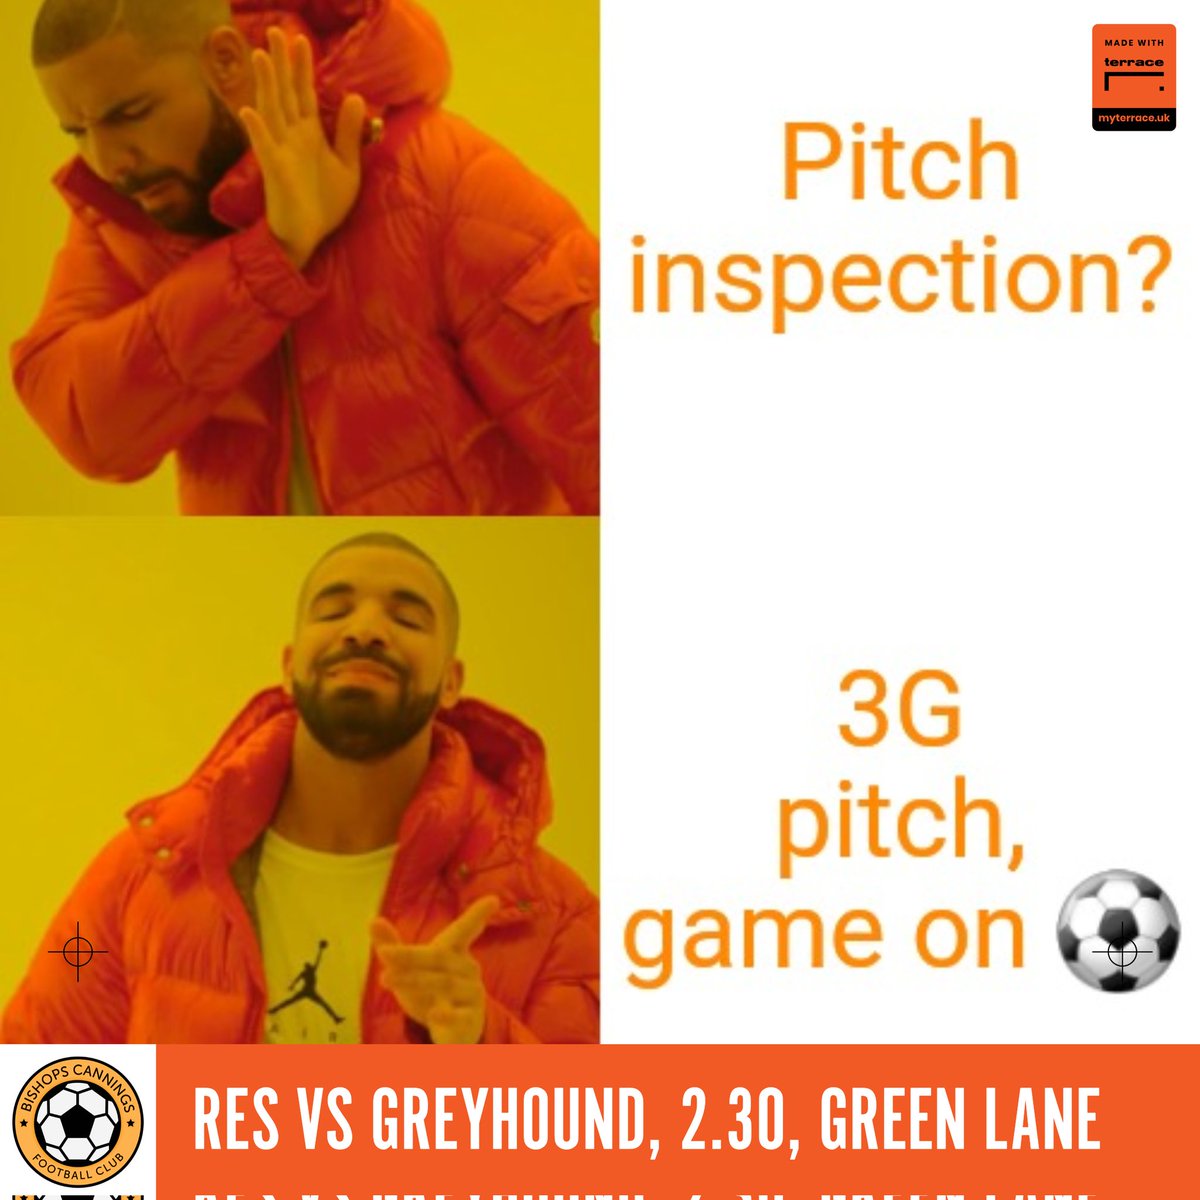 No inspection required for our reserves today. Playing on our @GreenLanePF 3G pitch. Home of @WiltsCountyFA we will definitely be ON @OfficialTDFL vs @FC_Greyhound 2.30 Come support the team, the cafe is open 😁 #upthecannings 🧡🖤